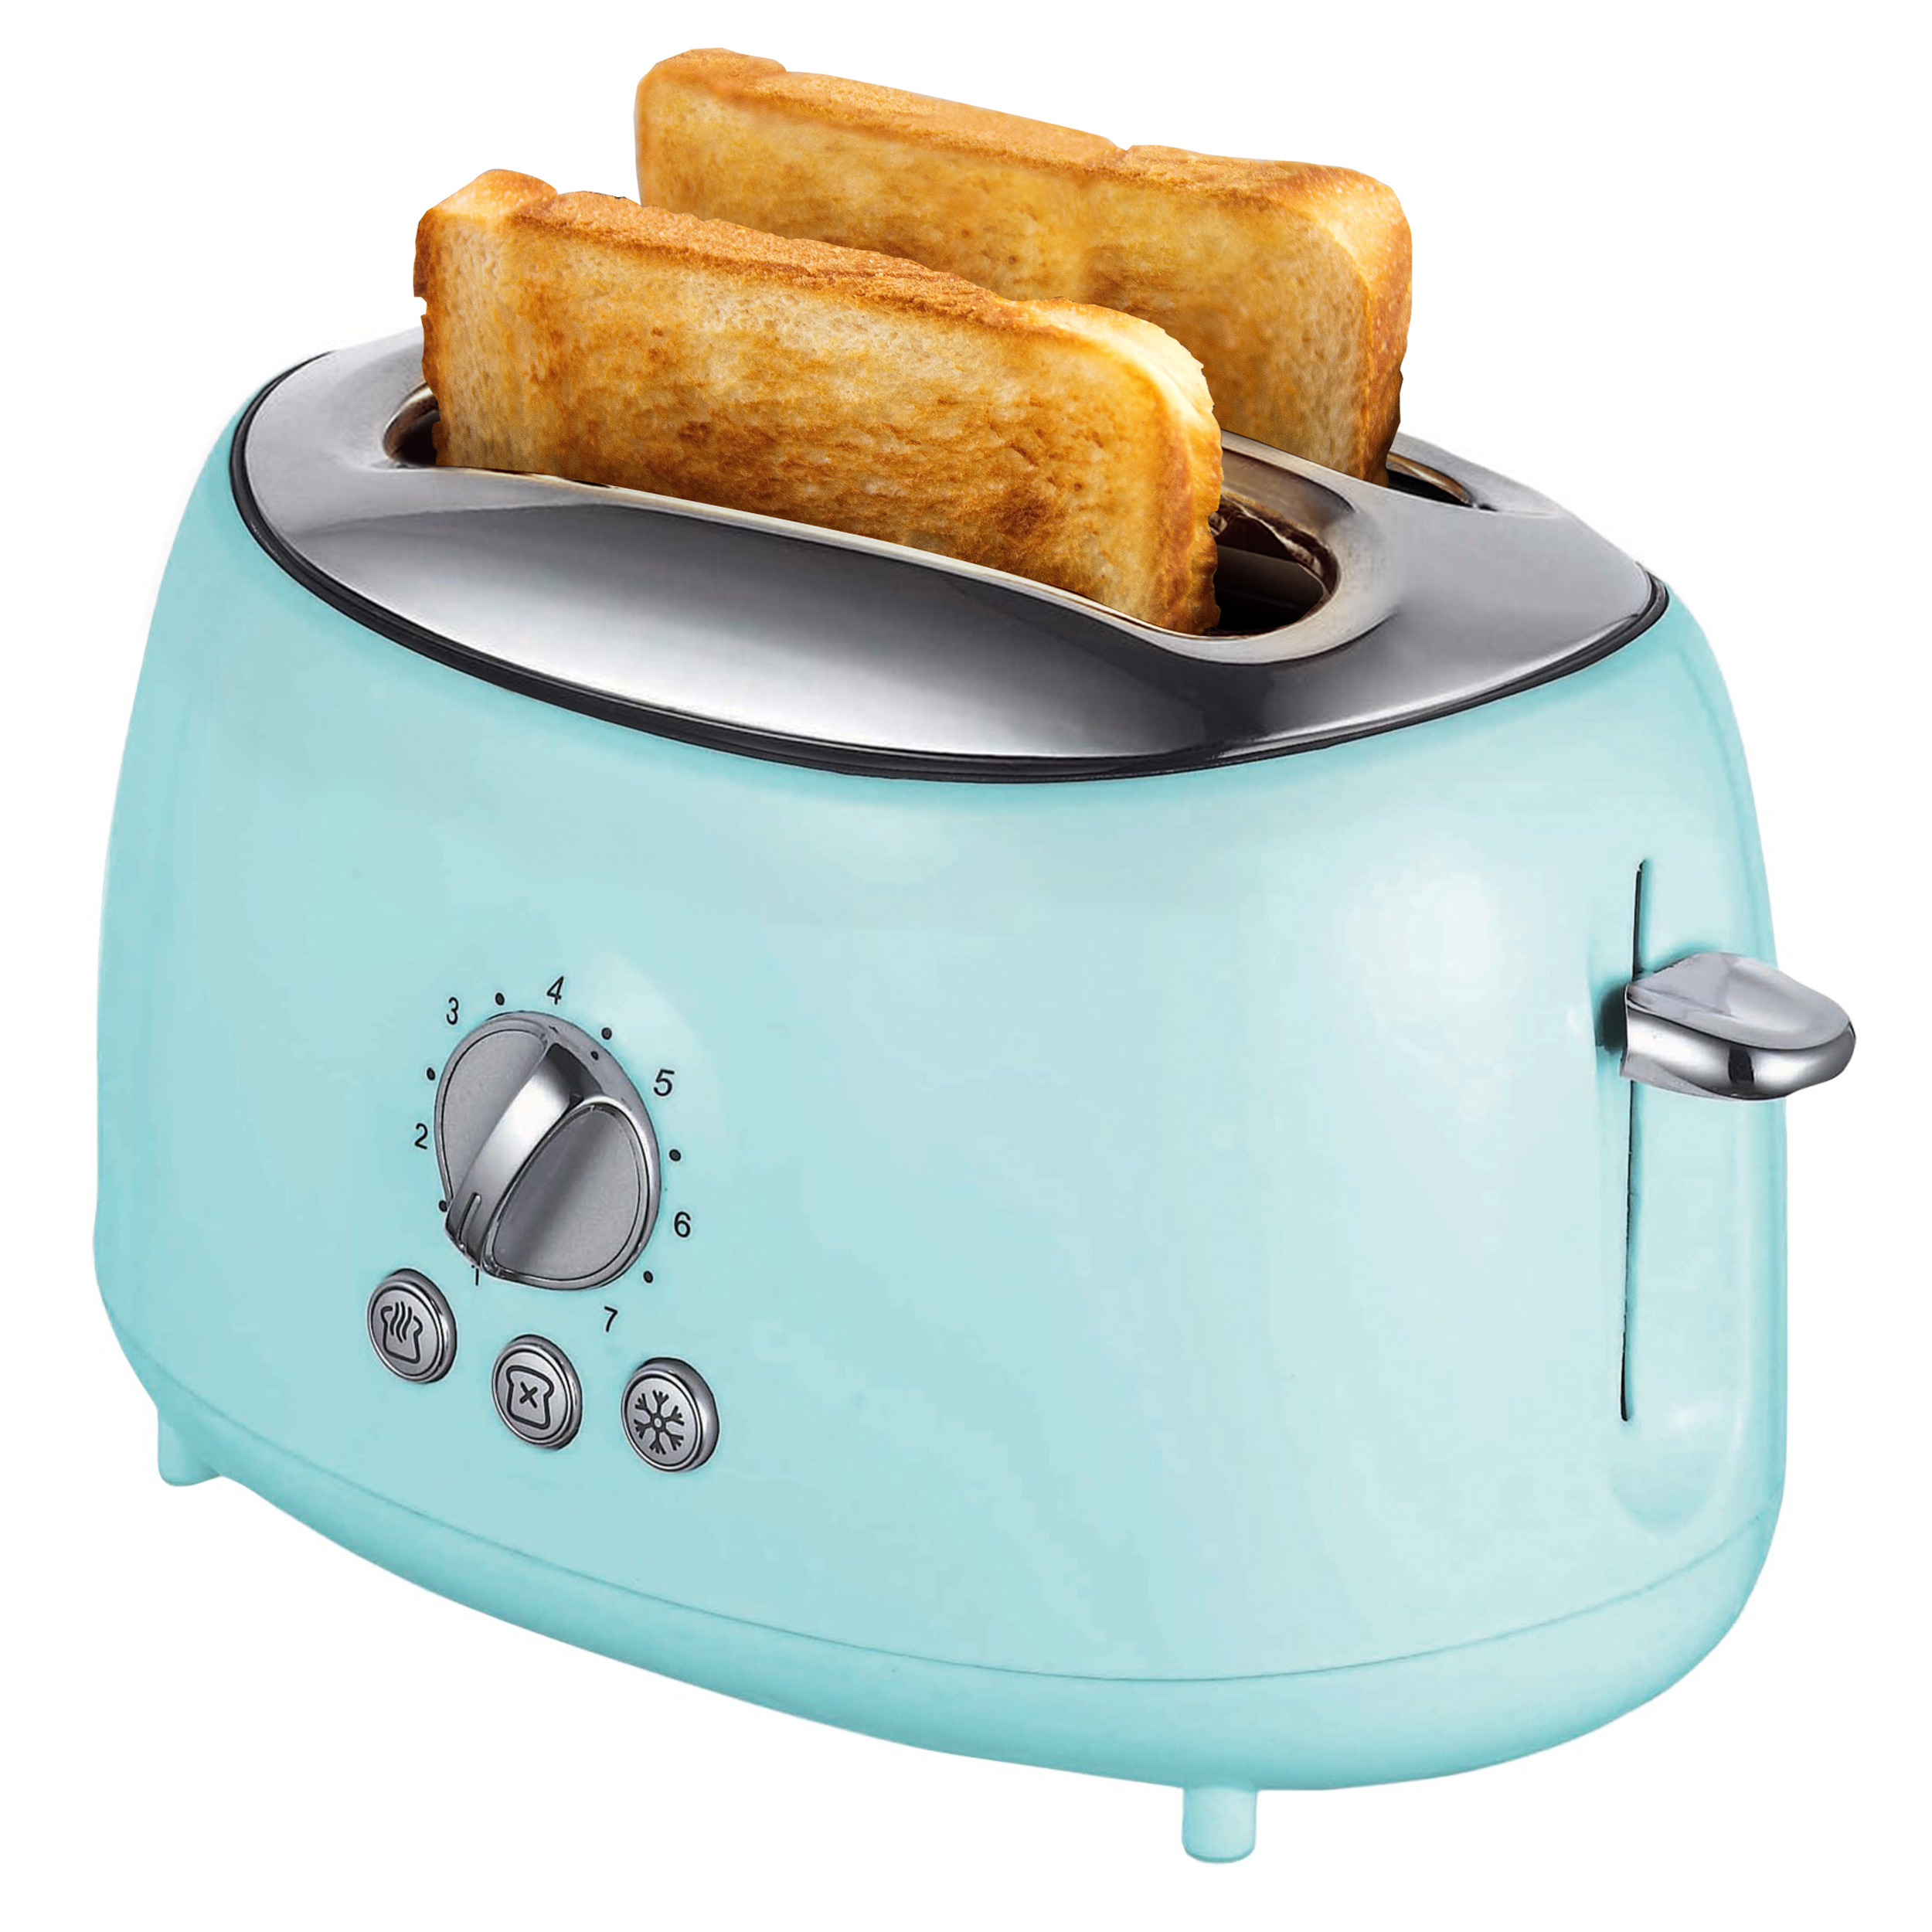 Brentwood Cool-Touch 2-Slice Retro Toaster with Extra-Wide Slots (Blue) - image 1 of 8